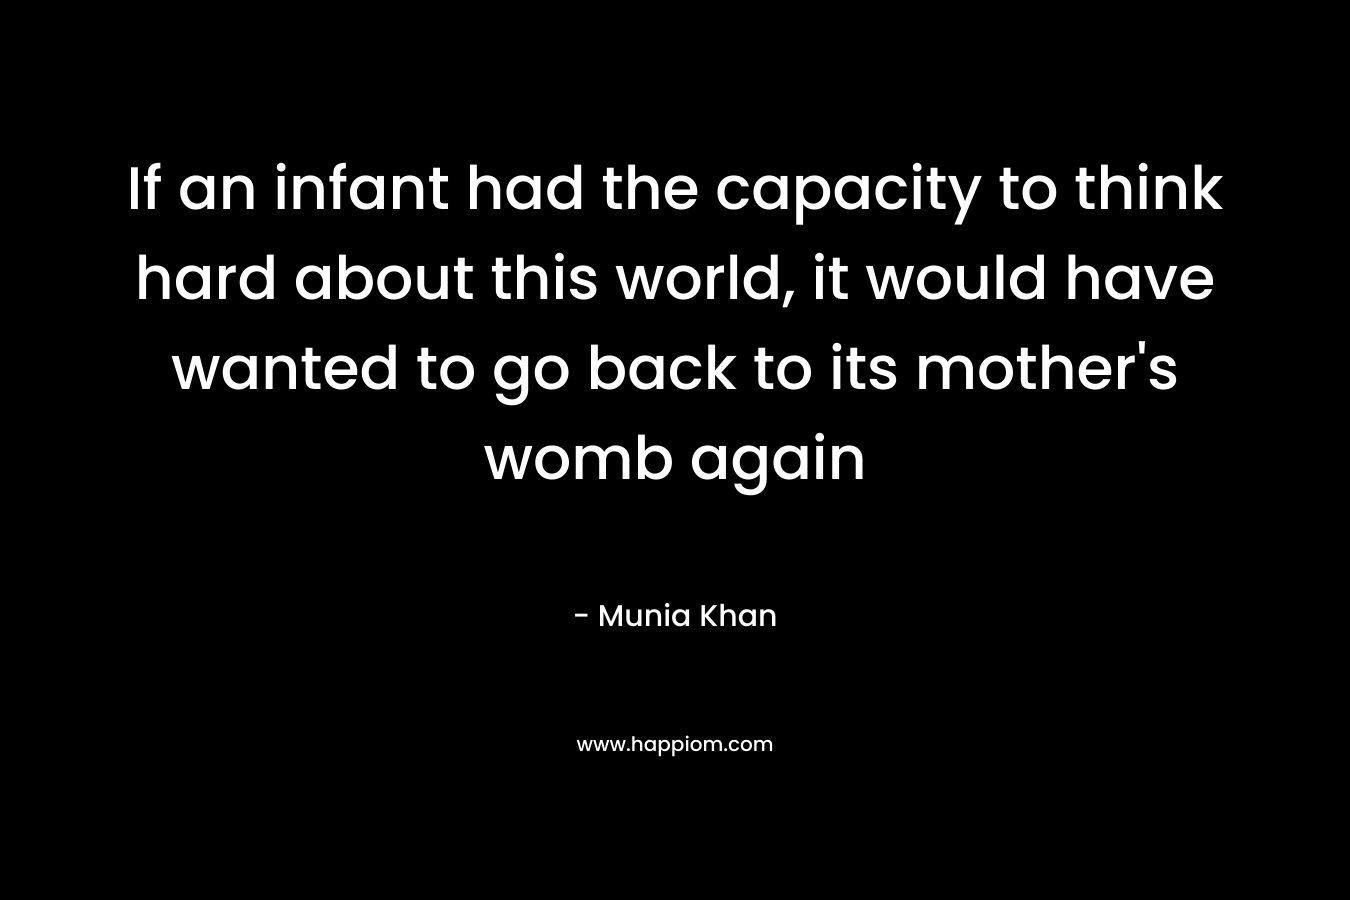 If an infant had the capacity to think hard about this world, it would have wanted to go back to its mother's womb again